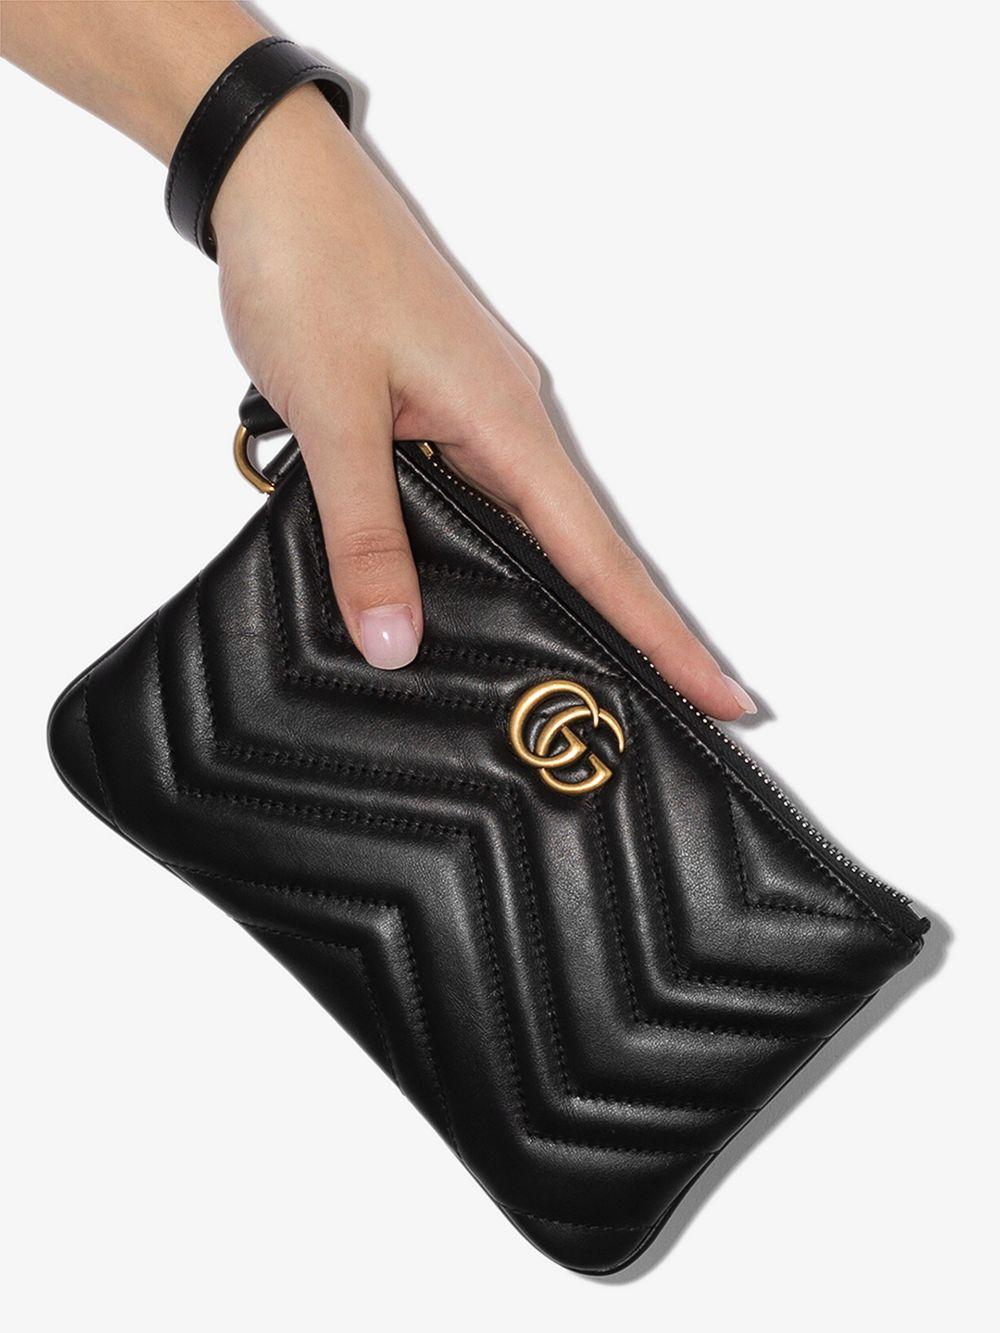 Gucci Marmont Quilted Leather Wrist Wallet in Black | Lyst